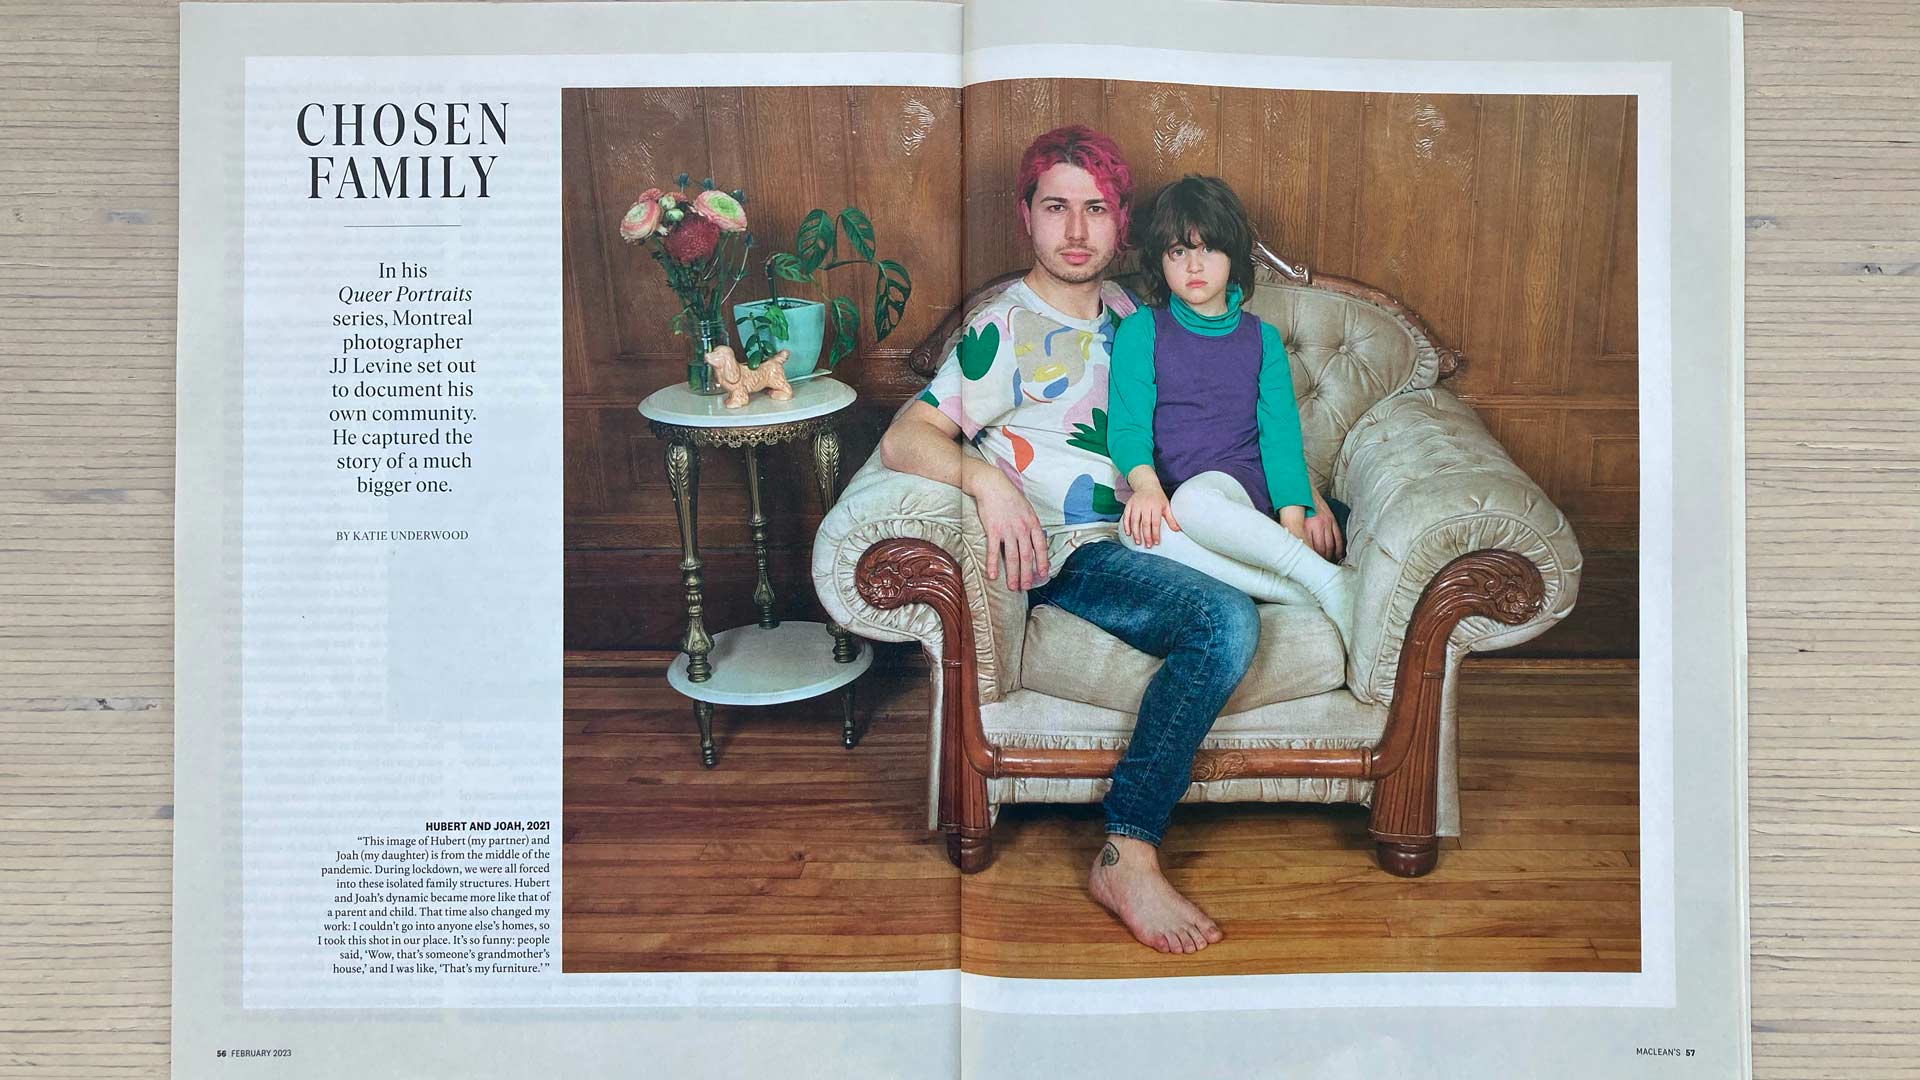 JJ Levine’s ‘Queer Portraits’ series featured in the February 2023 issue of Maclean’s magazine